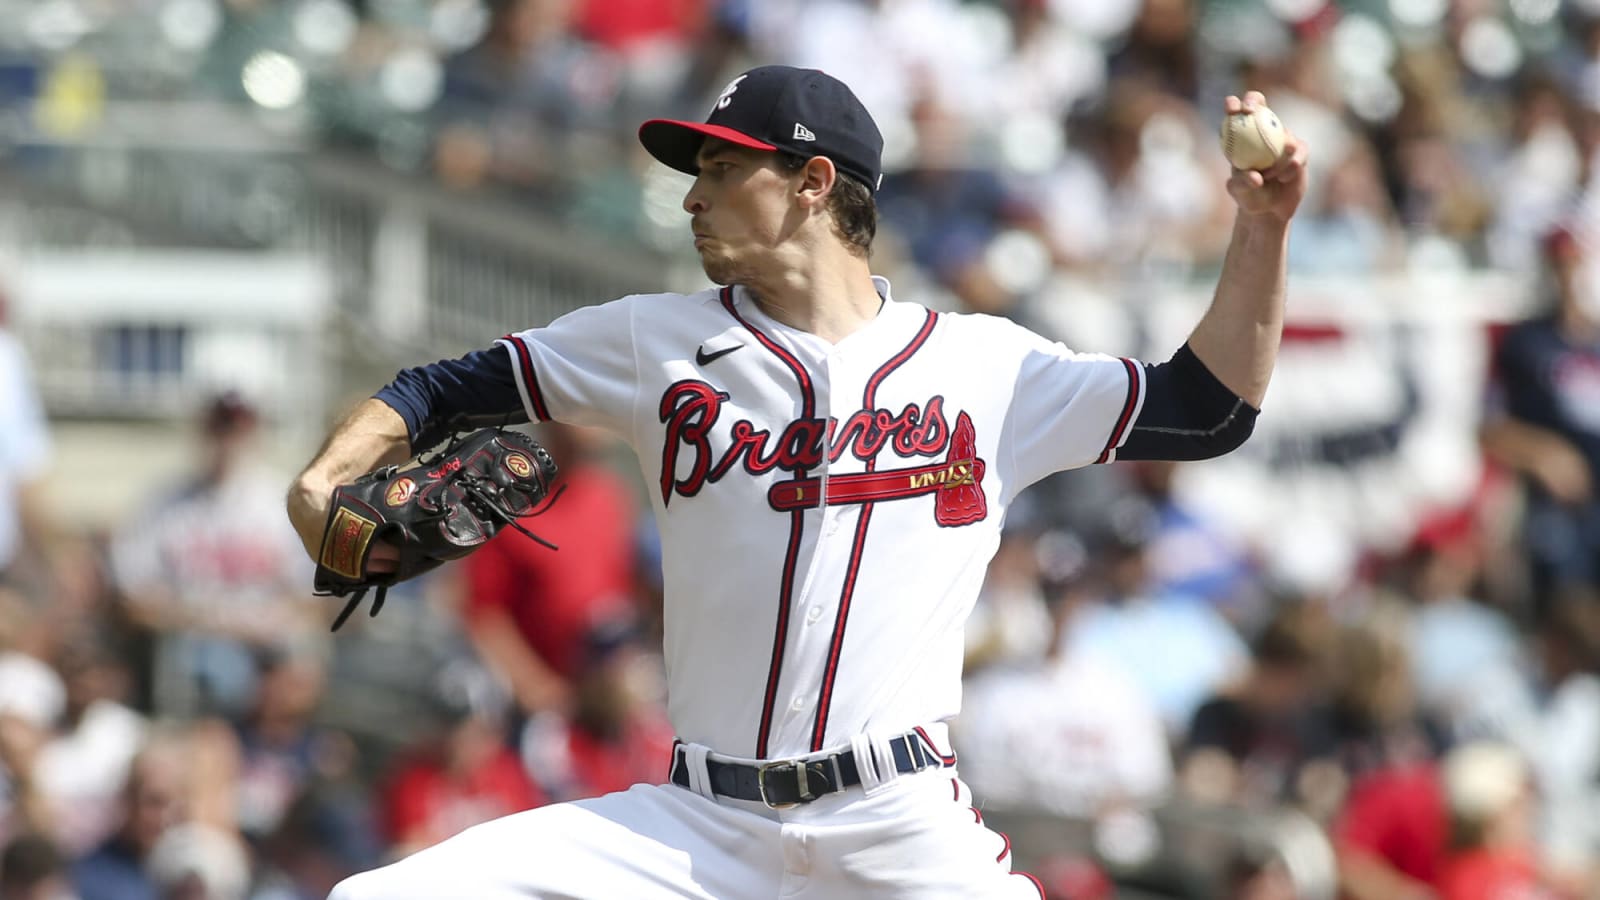 Where does MLB Network rank Max Fried among all starting pitchers?